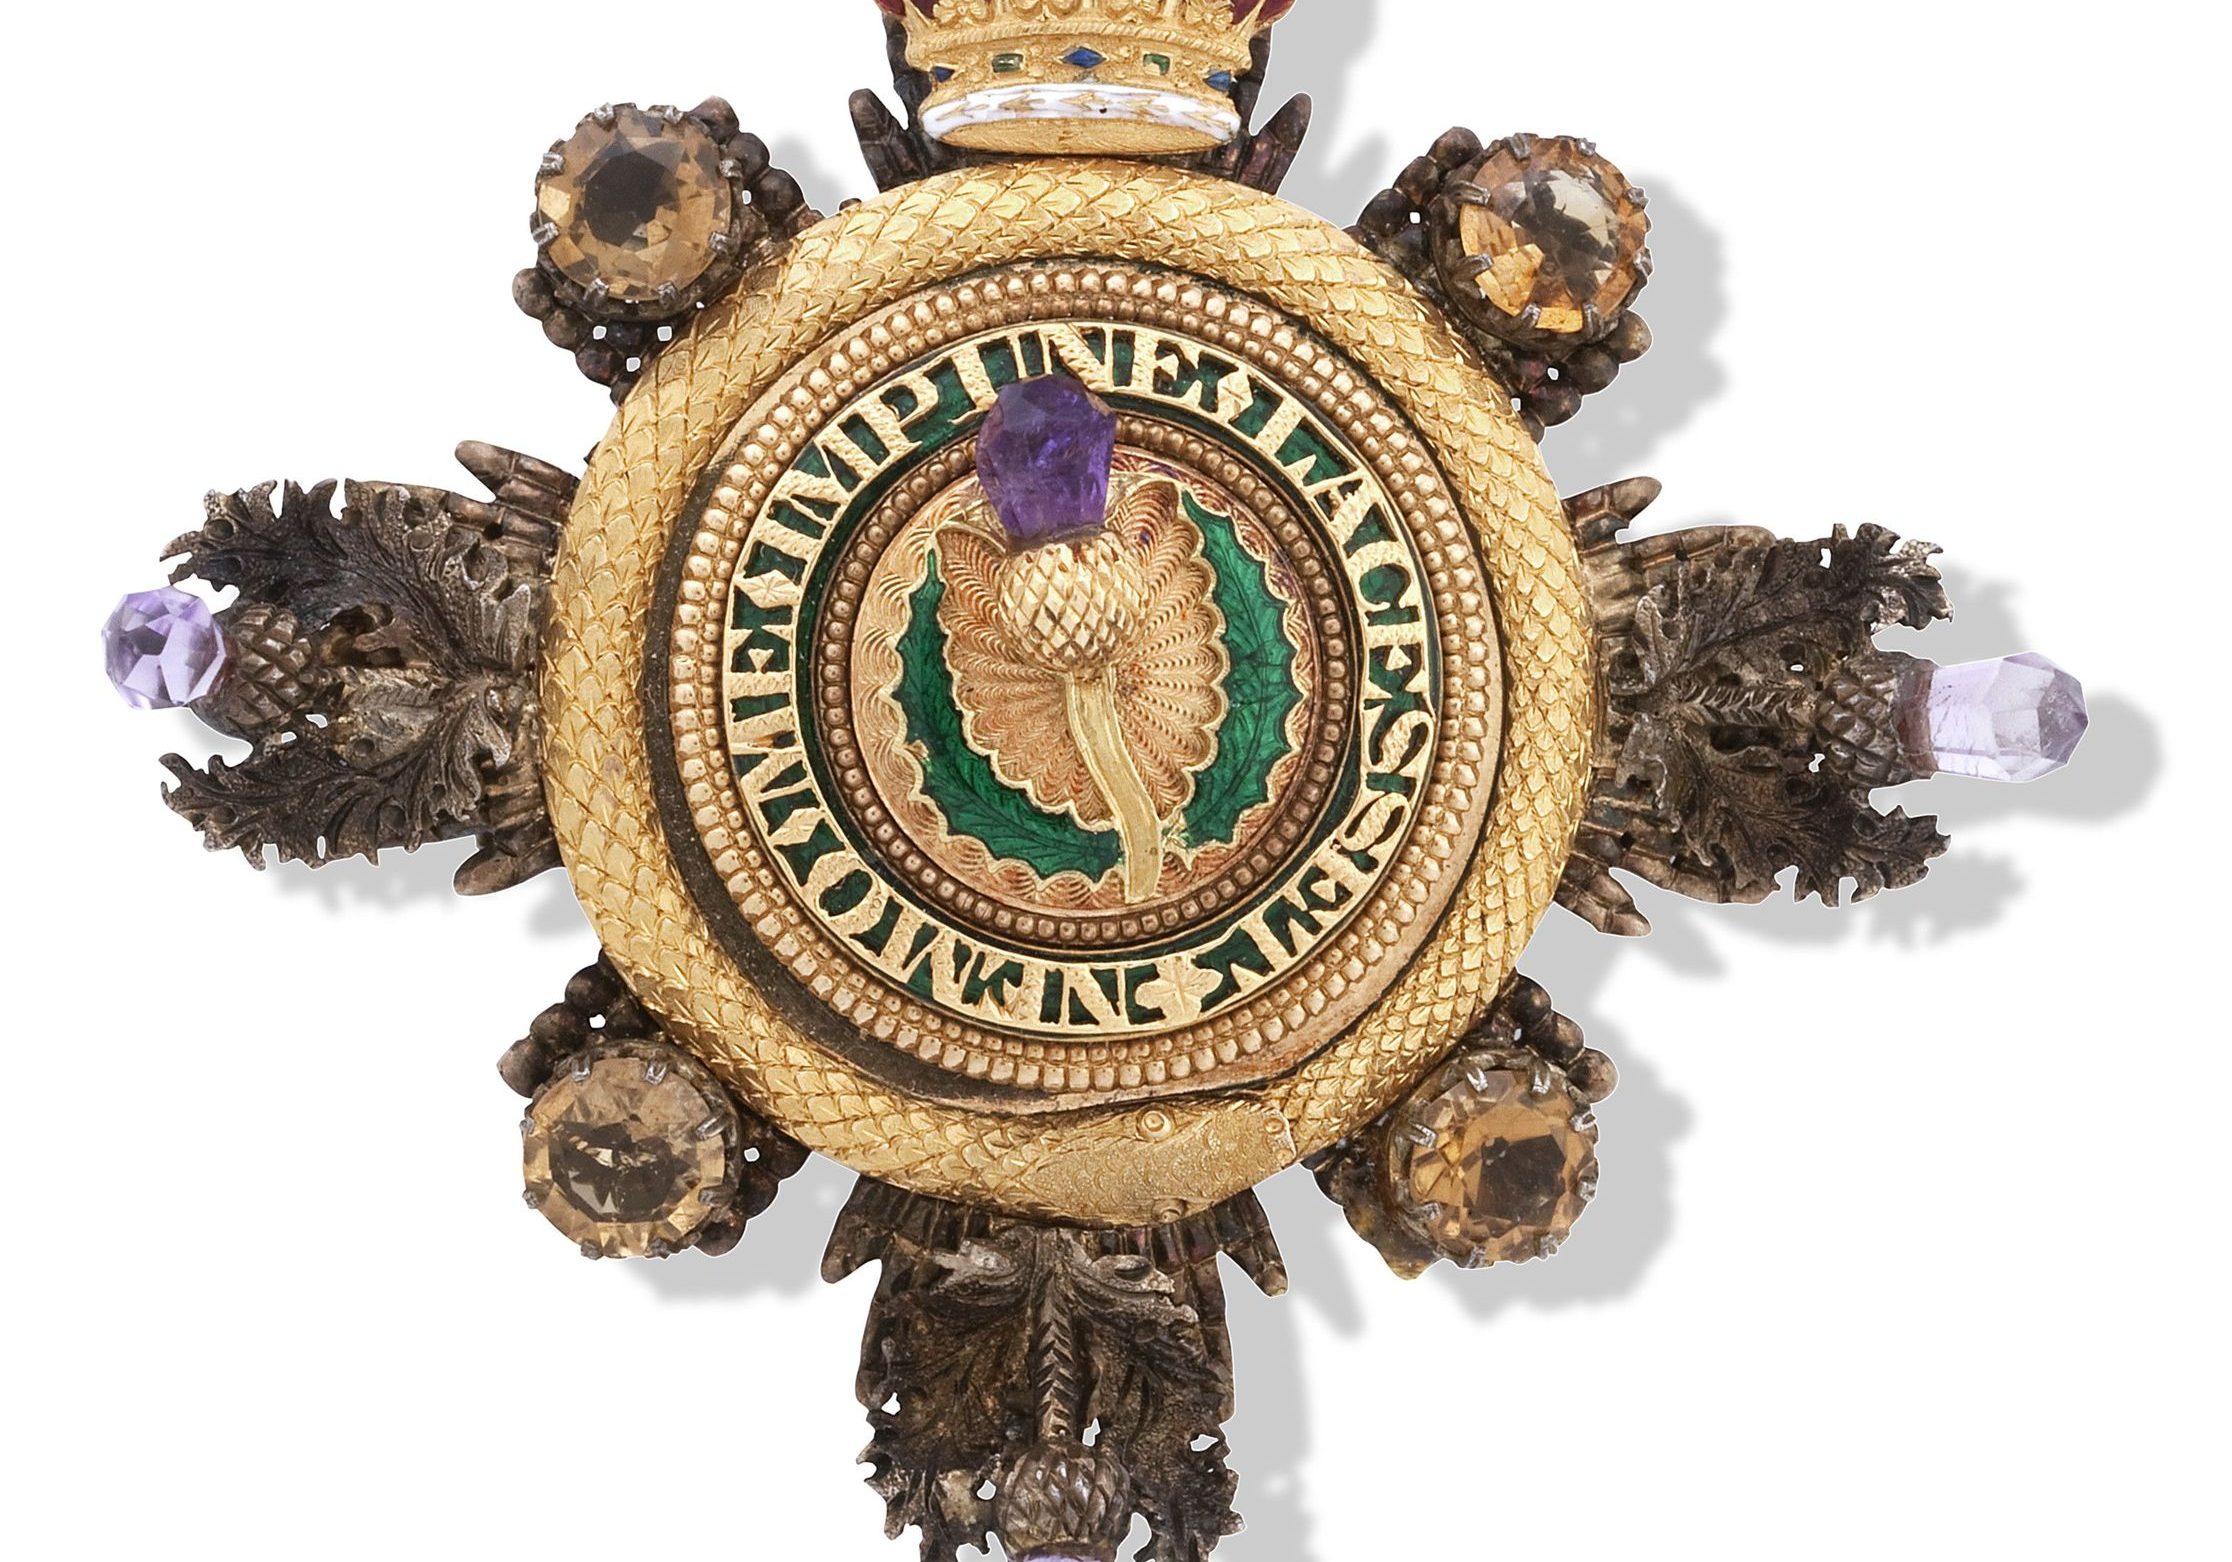  An Order of the Thistle brooch from the 19th century